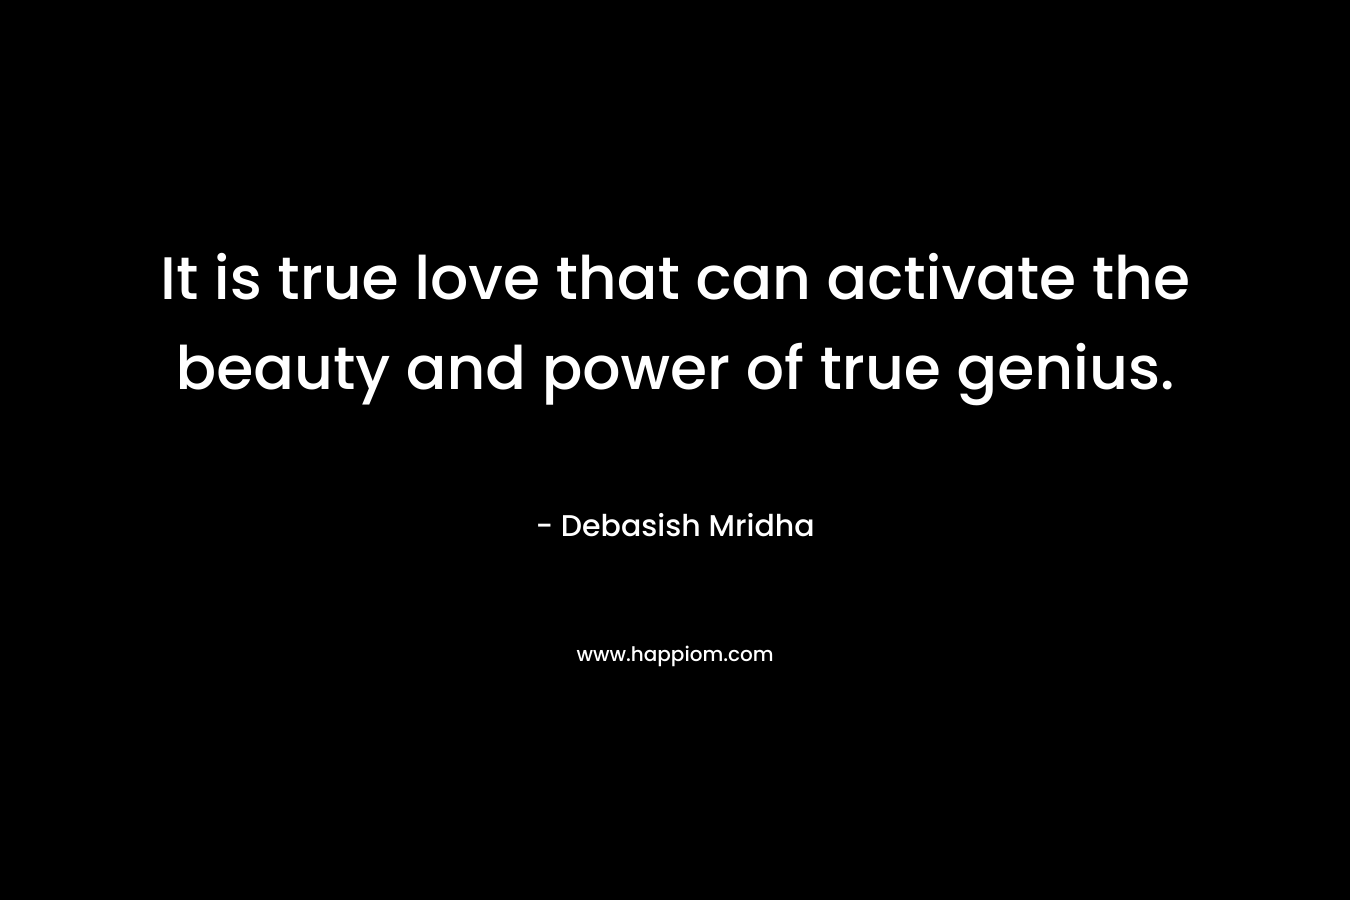 It is true love that can activate the beauty and power of true genius. – Debasish Mridha